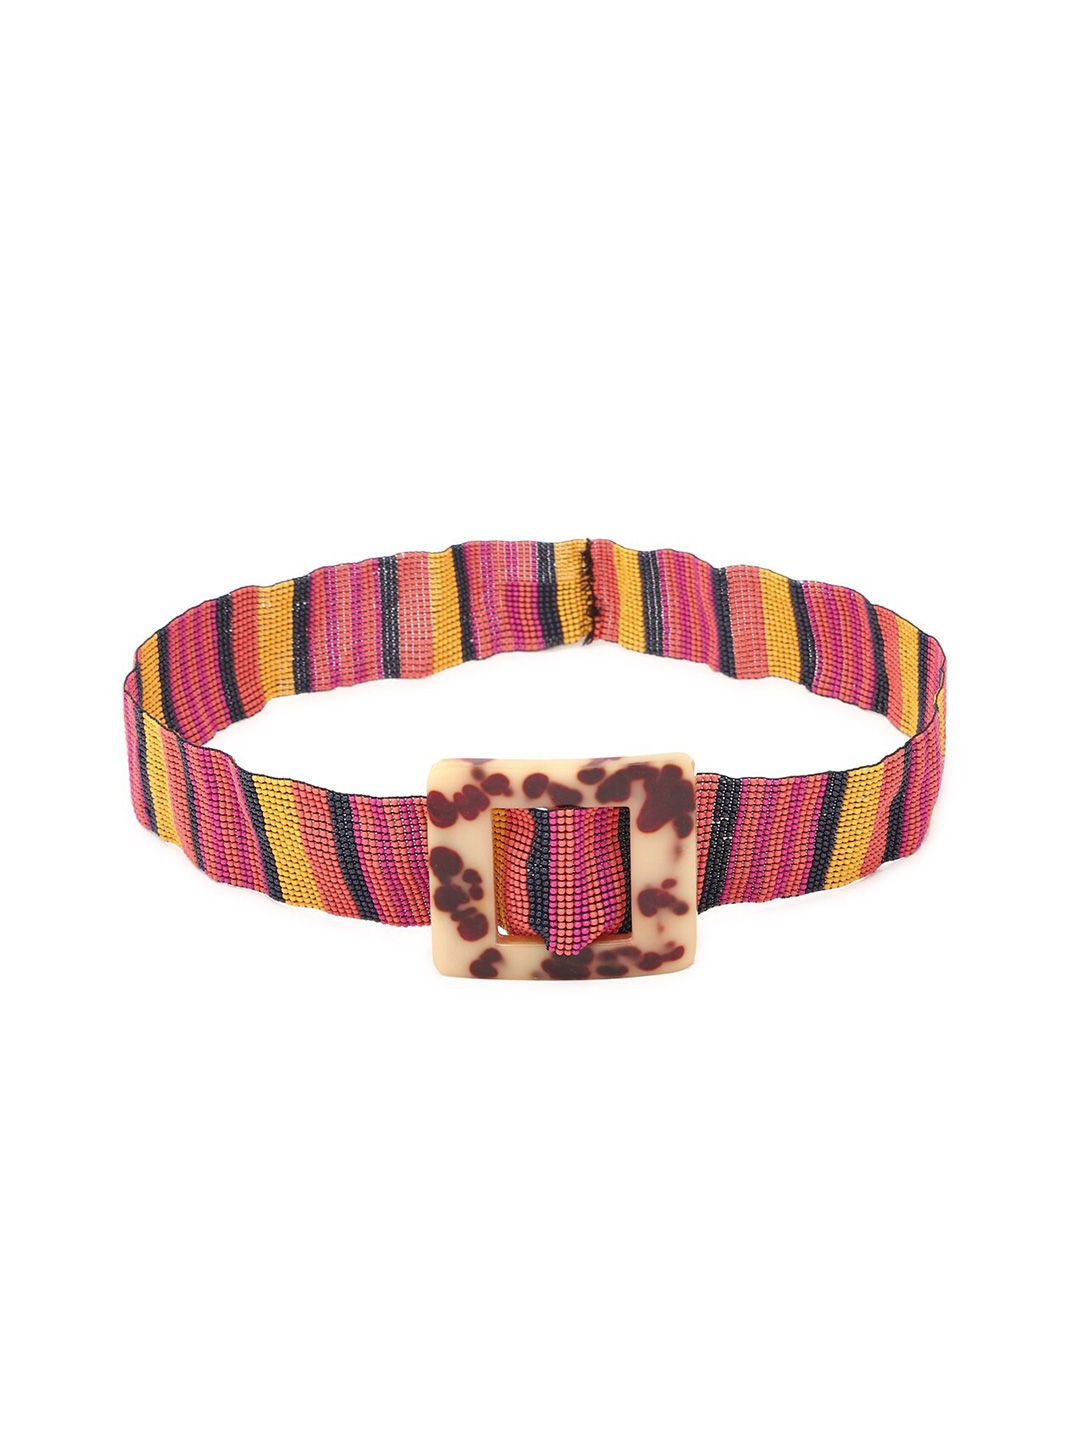 FOREVER 21 Women Pink Wide Printed Belt Price in India